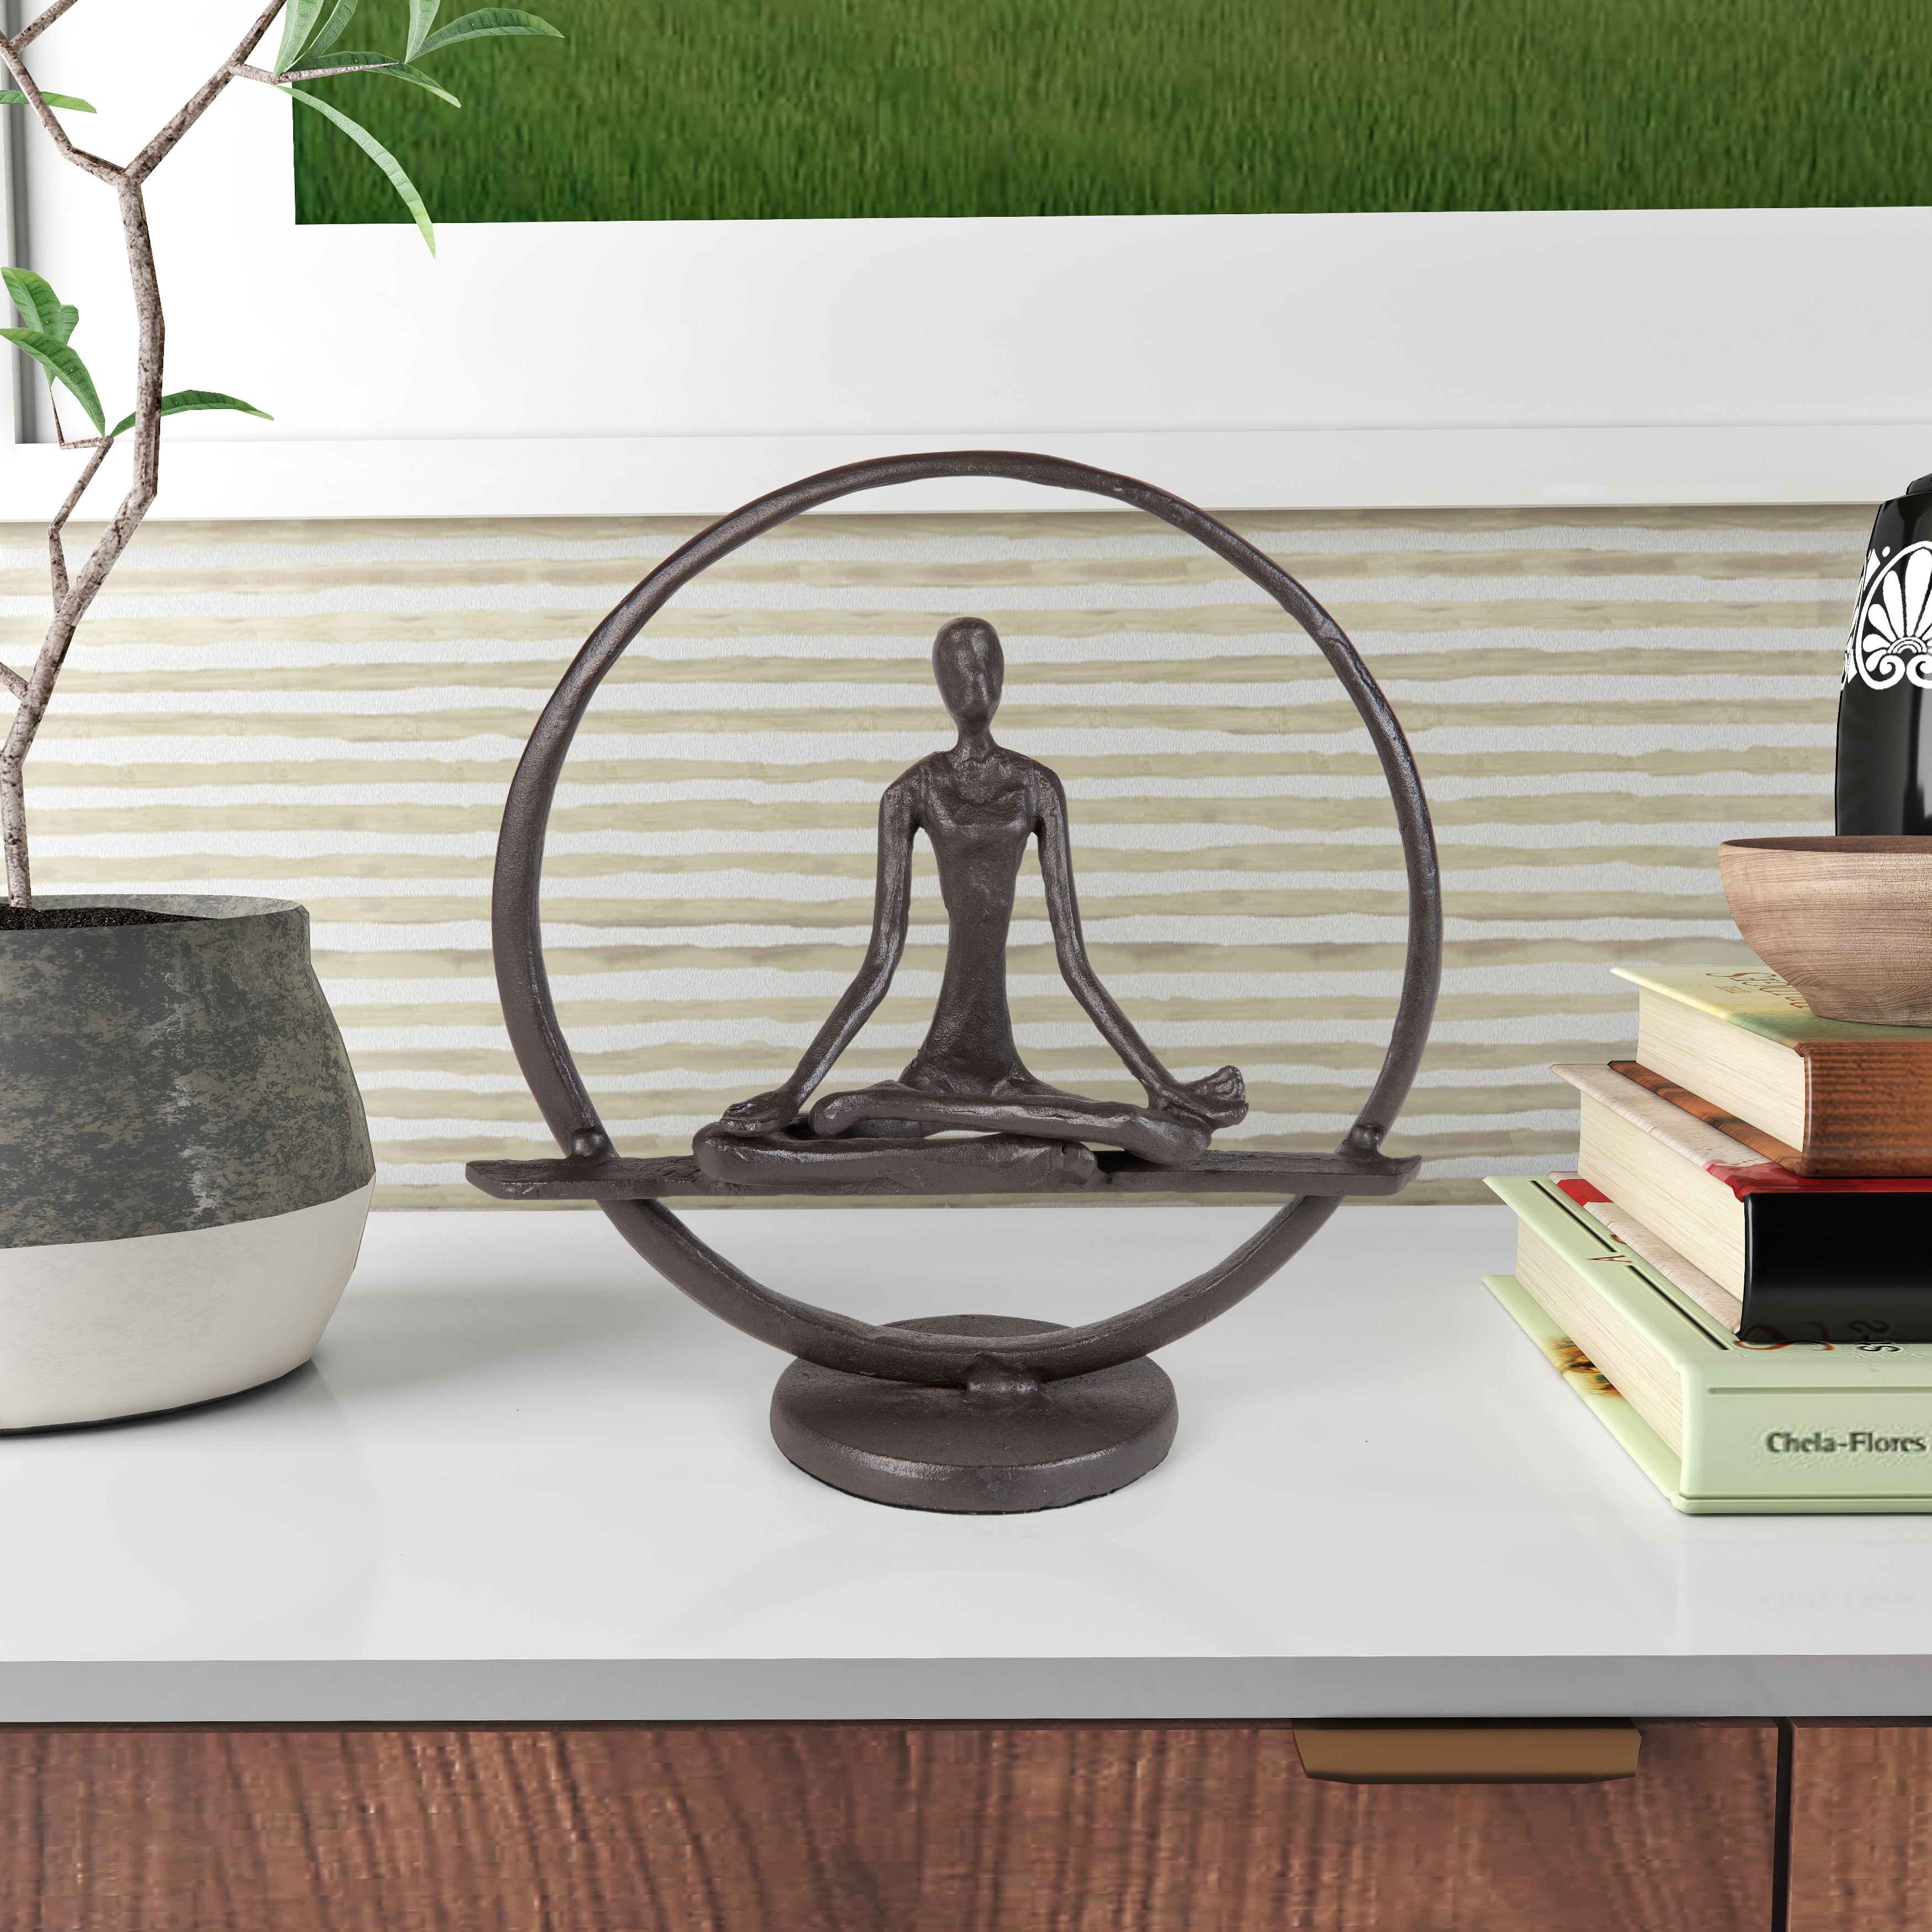 Danya B. ZI17195 Circle Iron Sculpture with Figurine in Yoga Pose – Namaste  Spiritual Home Décor – Great Gift Idea for Yoga Lovers